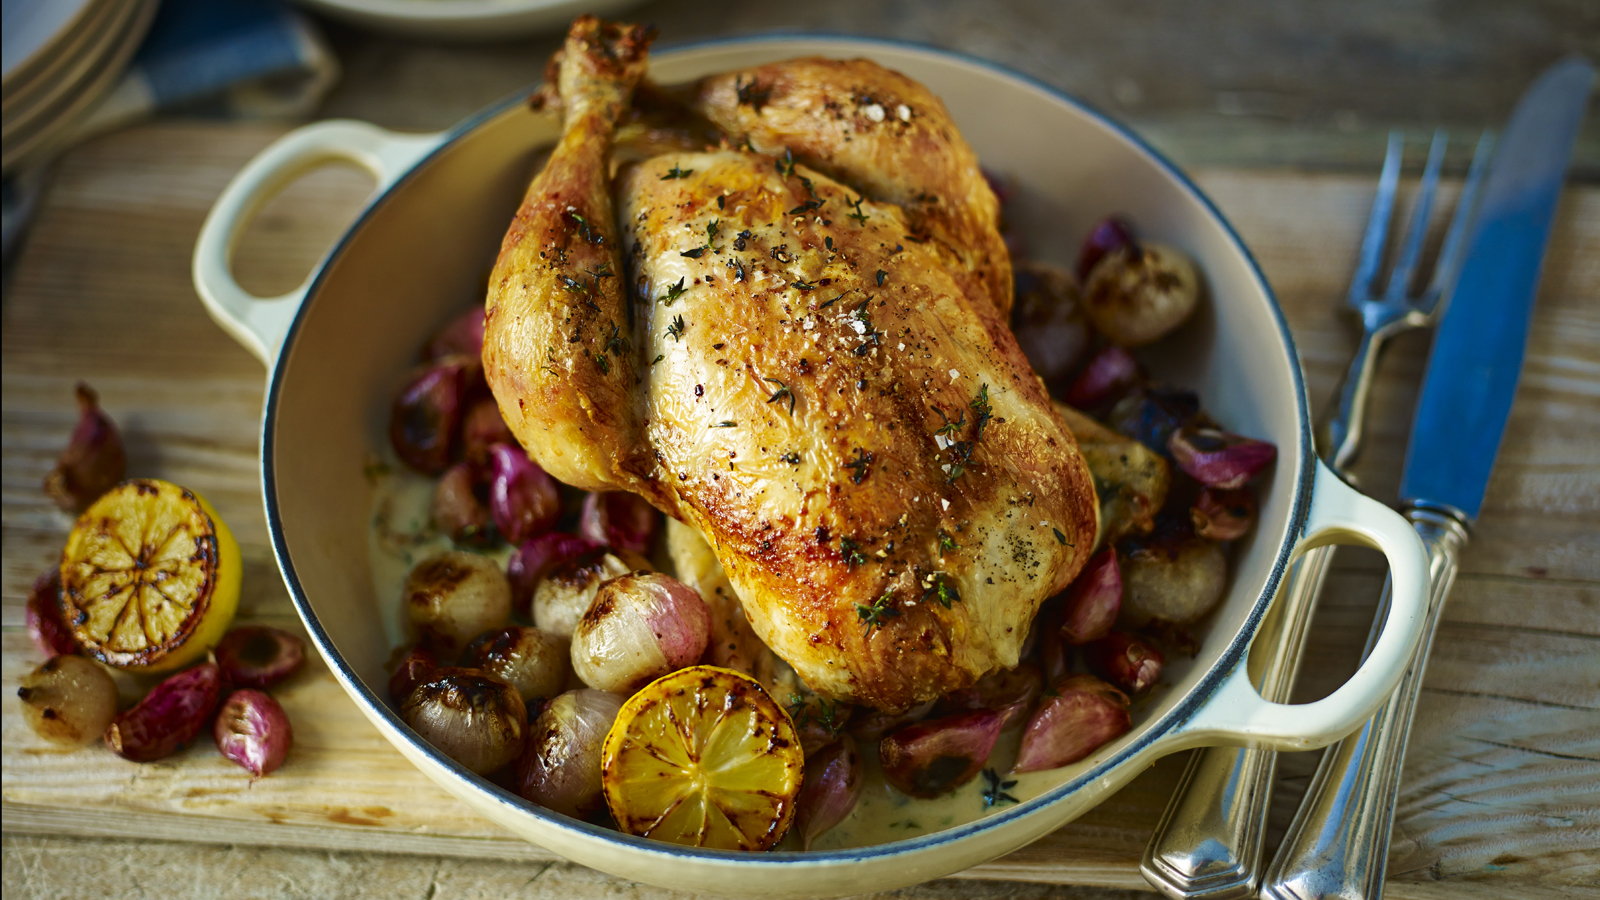 Slow-cooked roast chicken with gravy recipe - BBC Food